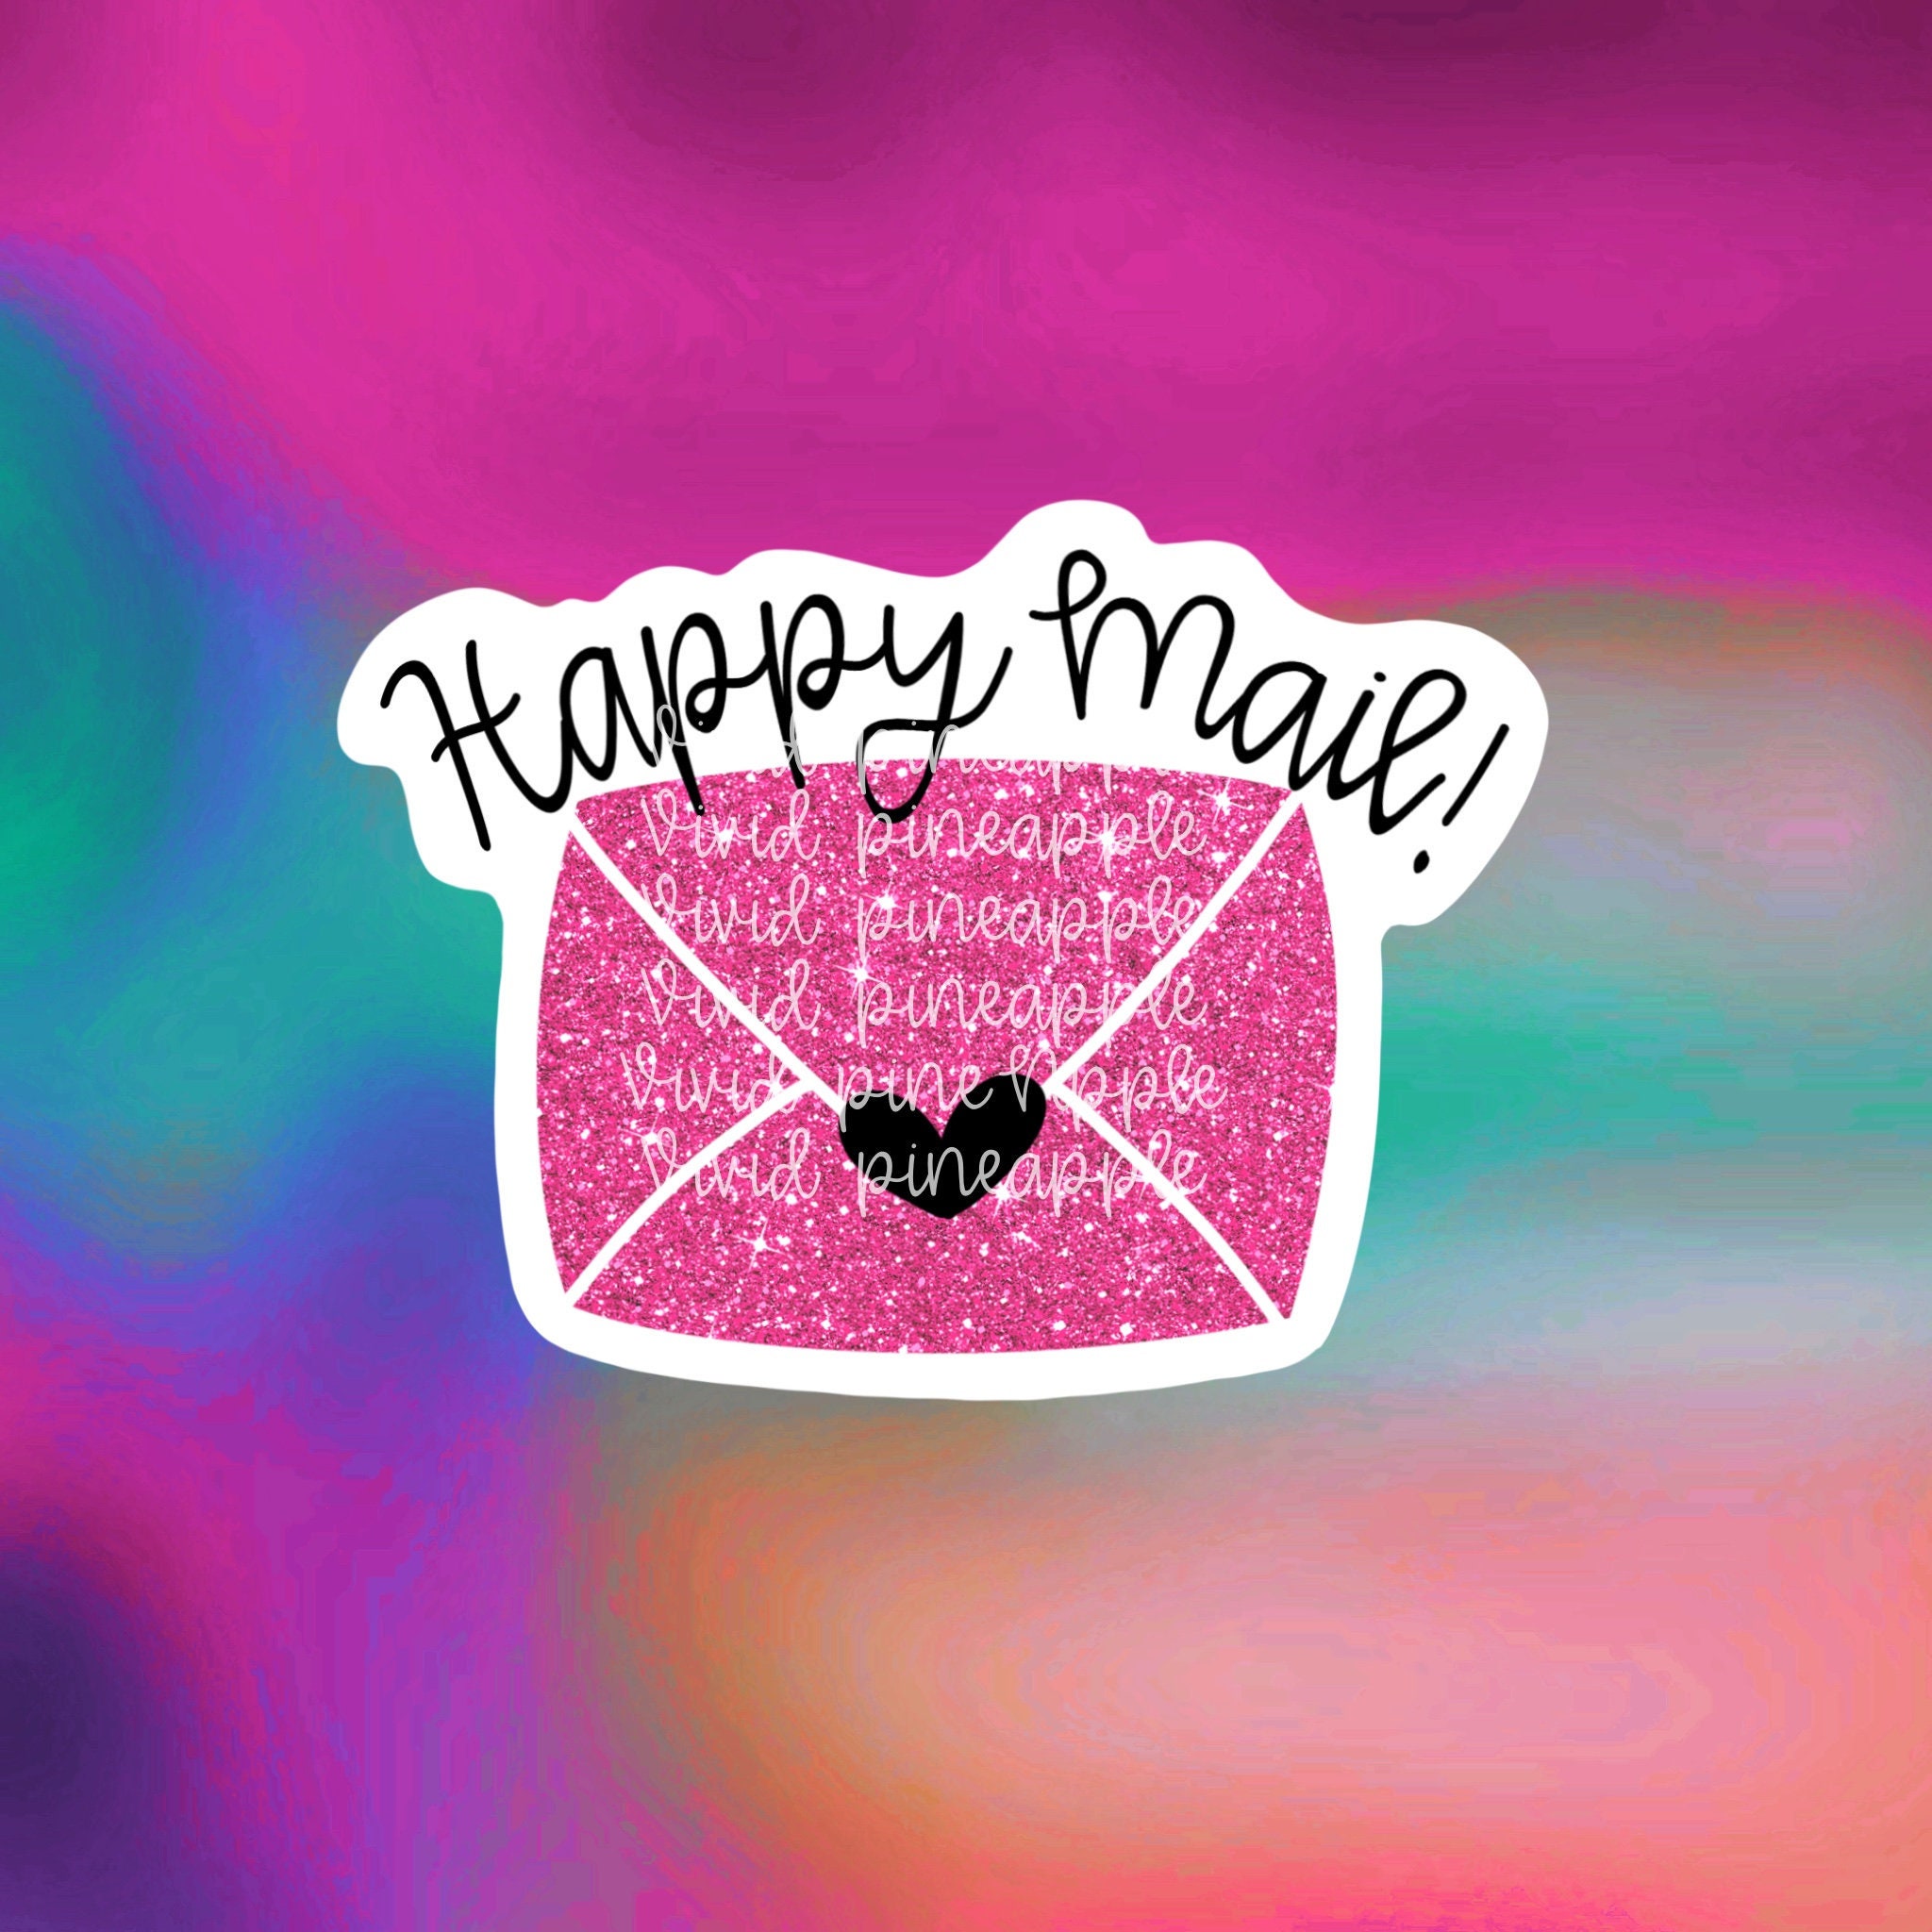 At interagere kobber buffet Automatic Download Happy Mail Pink Glitter Mail Envelope - Etsy